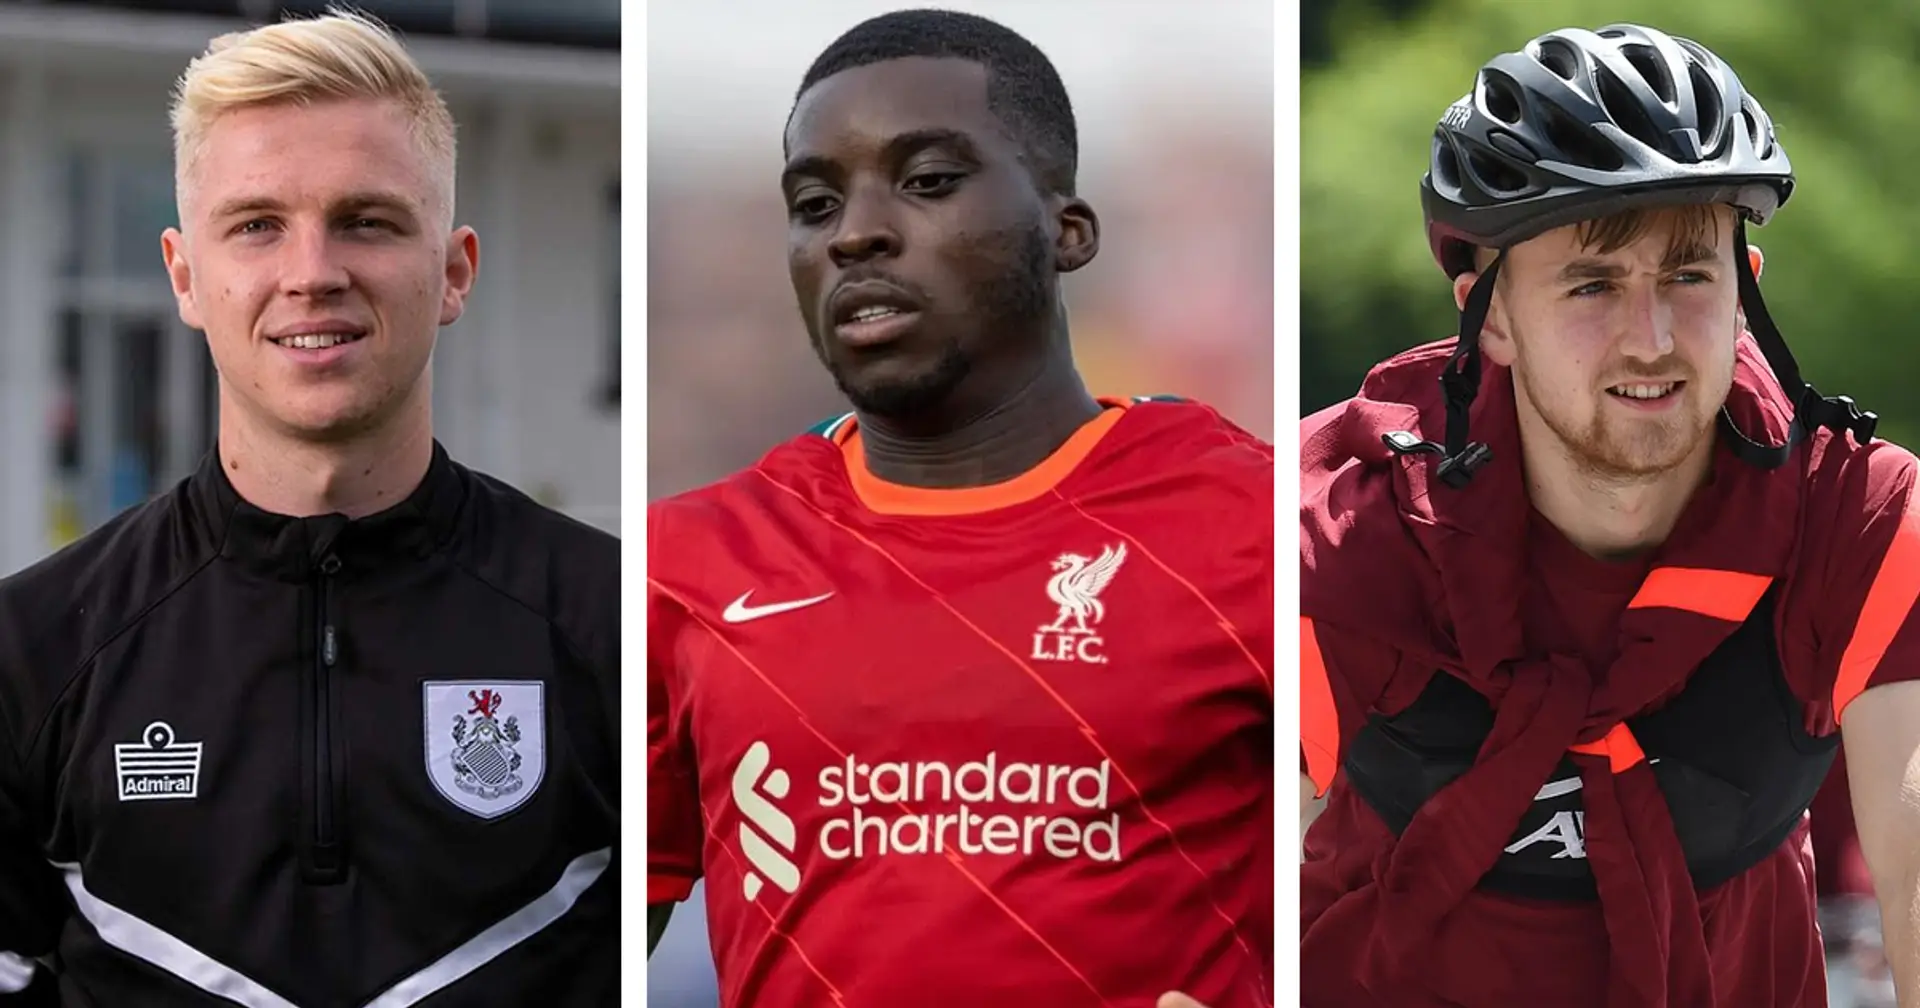 Liverpool confirm loan moves for Sheyi Ojo and 2 academy graduates